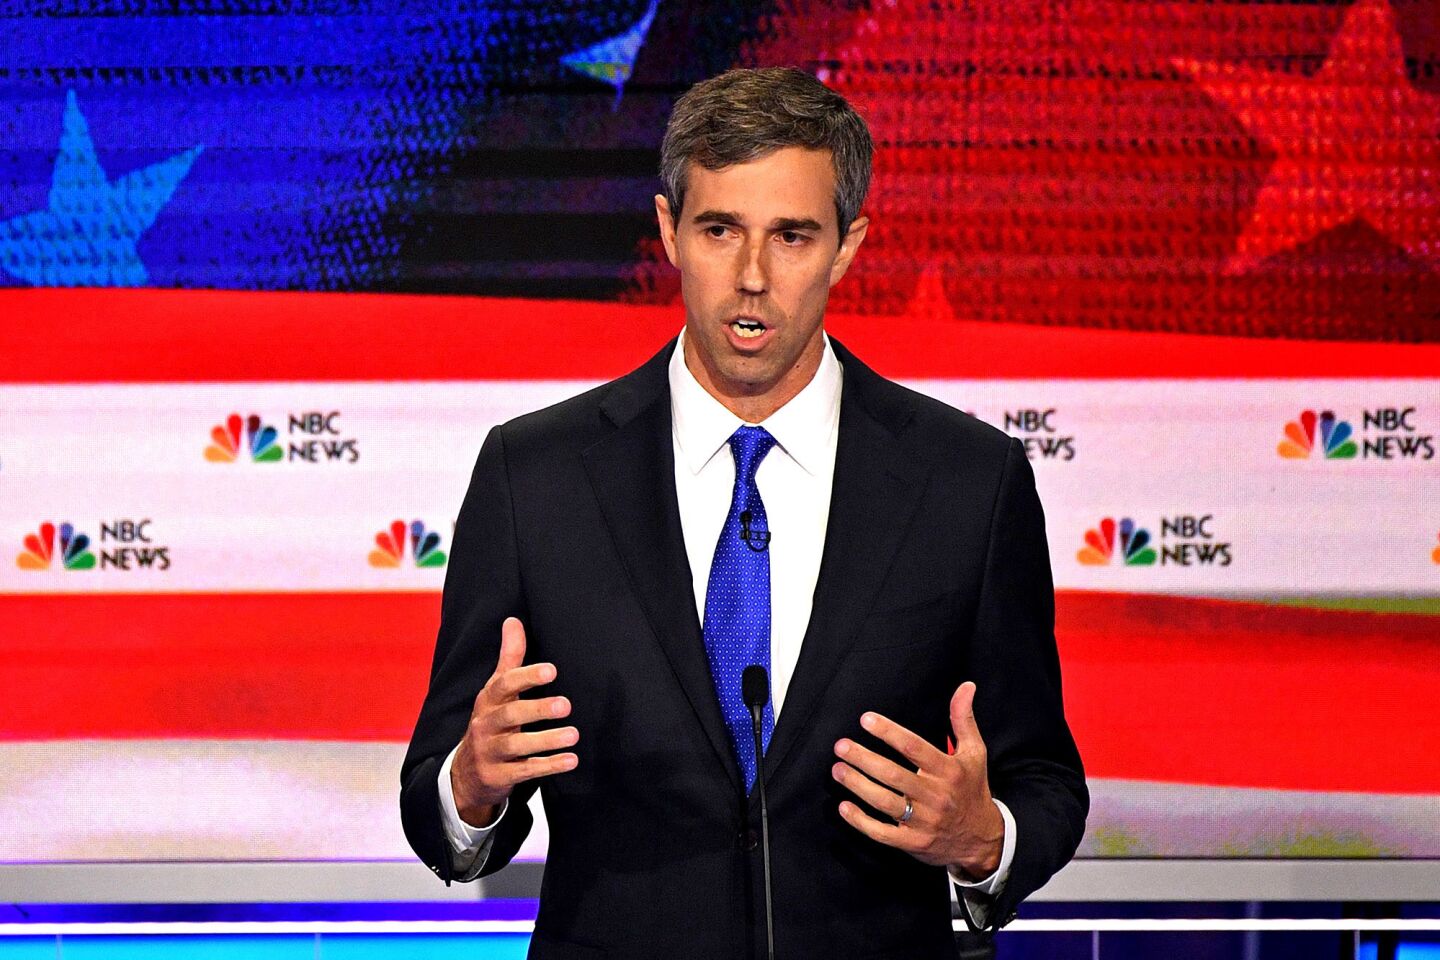 Former Texas Rep. Beto O'Rourke, shown here, got into a spat with fellow Texan Julián Castro over immigration reform when O'Rourke stressed the importance of prosecuting human traffickers and drug smugglers. Castro argued that there are other laws that enable them to be prosecuted.